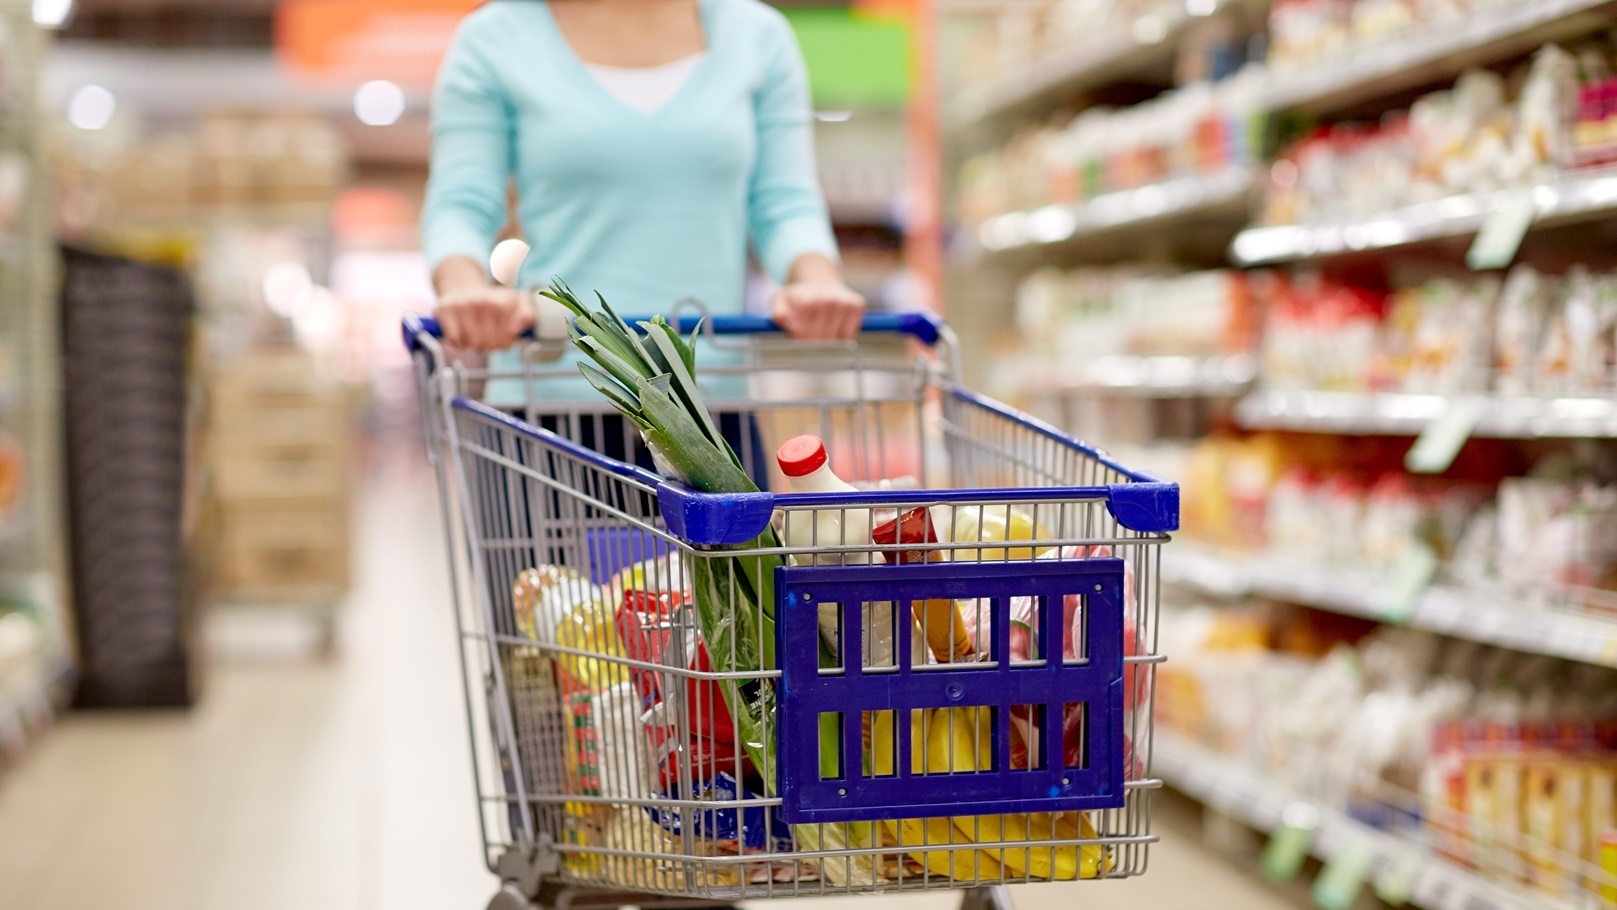 woman-with-food-in-shopping-cart-at-supermarket-2021-08-26-22-52-42-utc